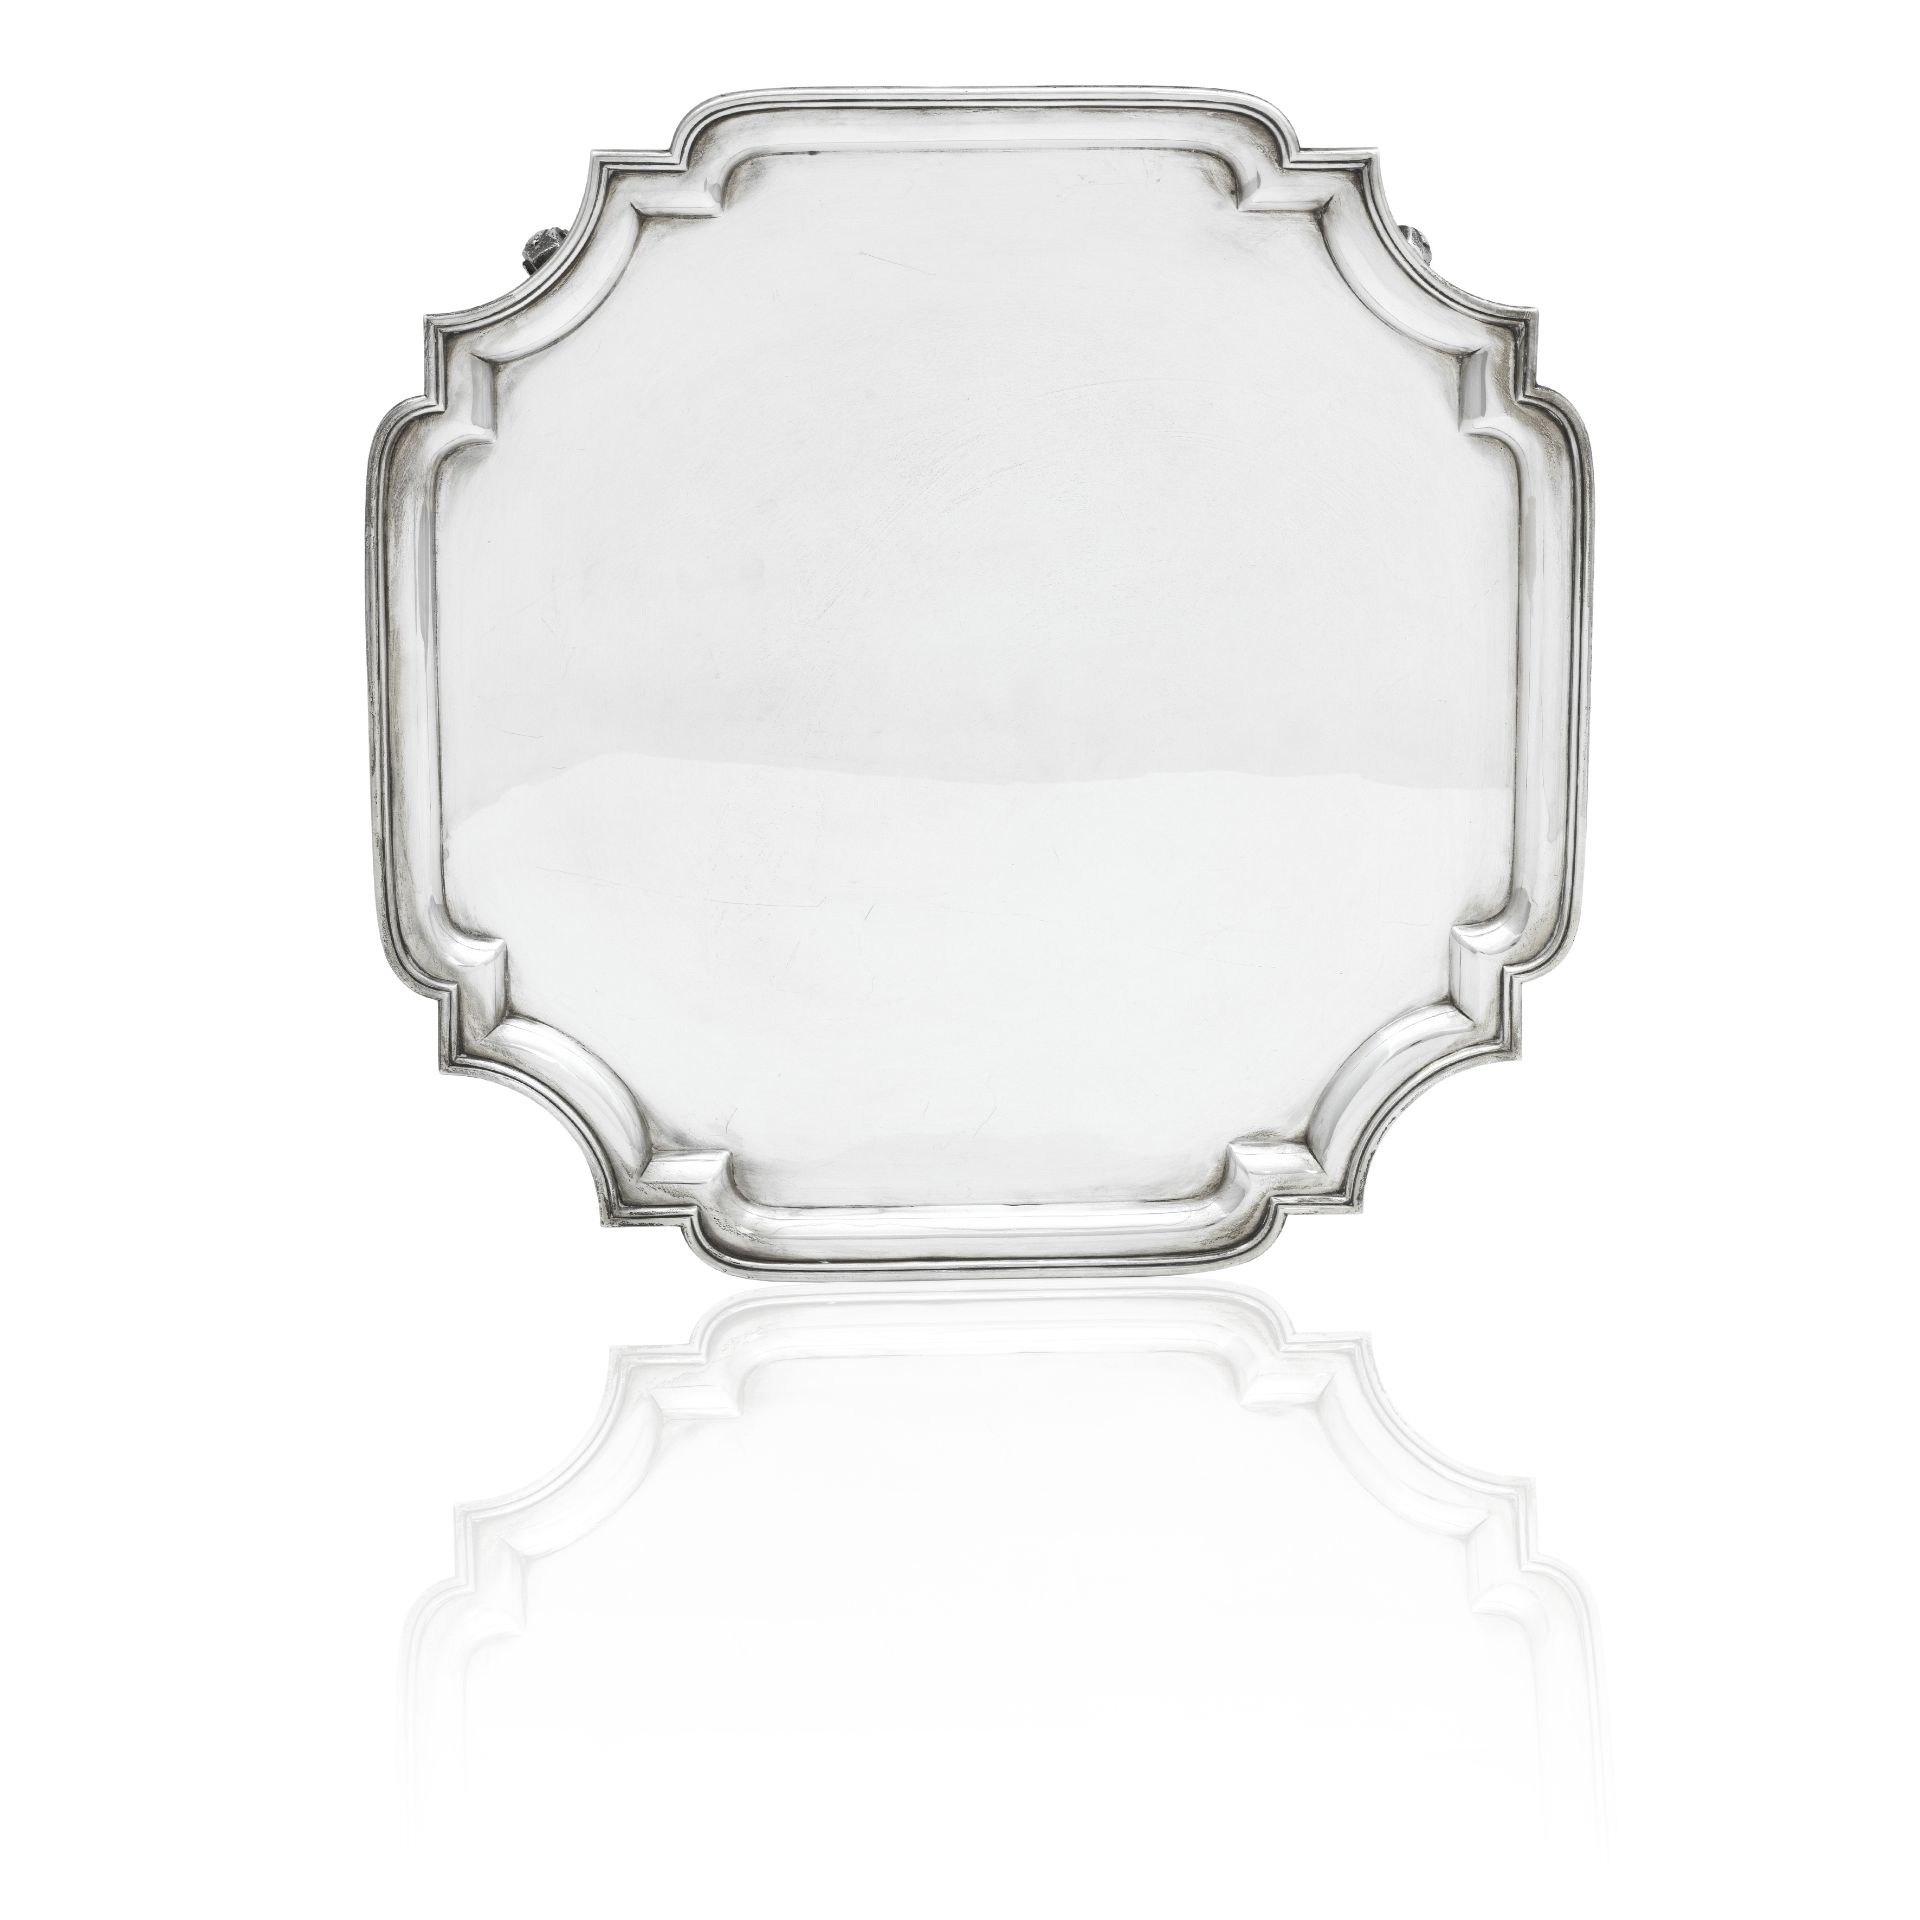 A GEORGE II STYLE SILVER SALVER By Mappin & Webb, Sheffield, 1928